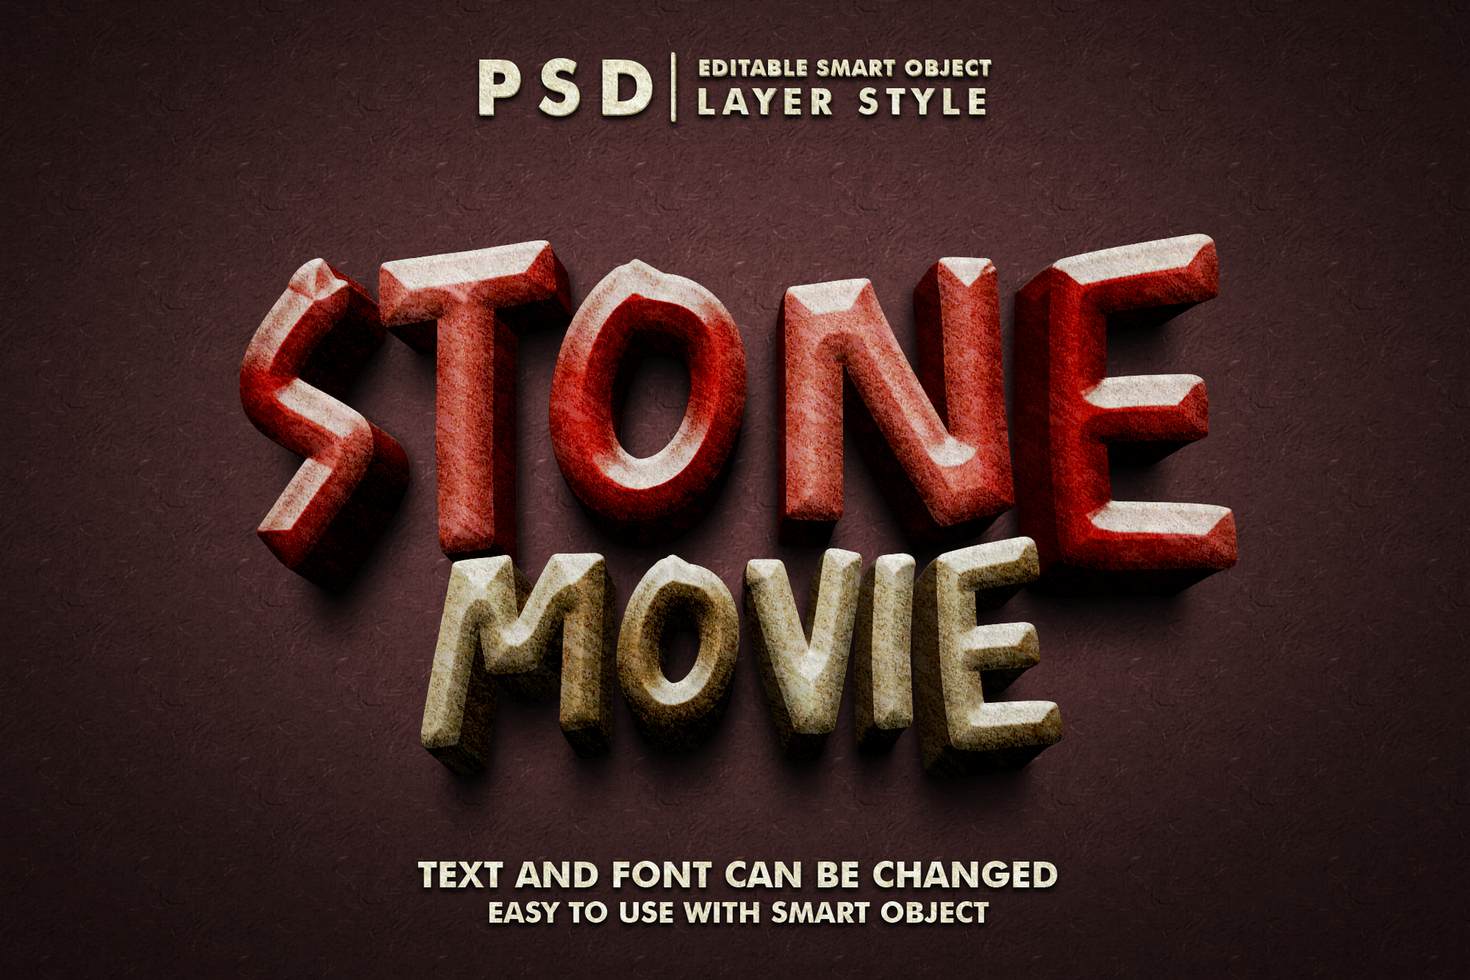 stone movie 3d realistic text effect premium psd with smart object